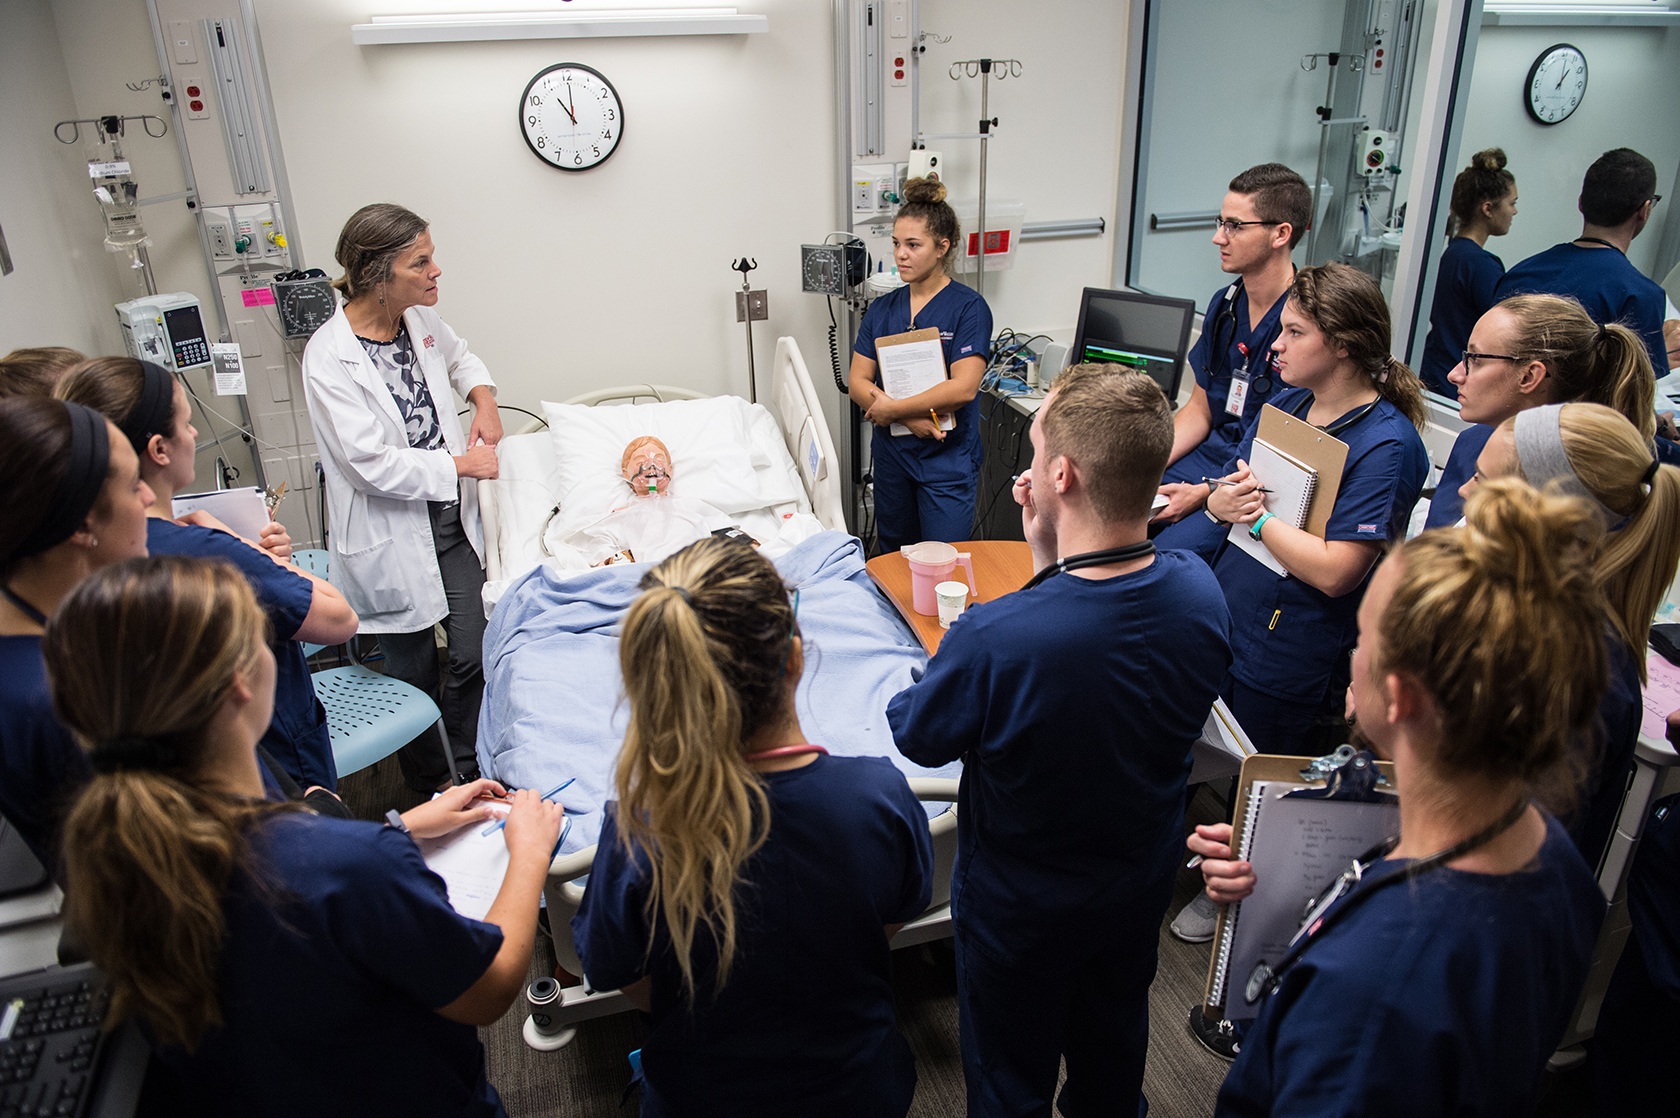 Female in white coat talking with students in blue scrubs at hospital bedside